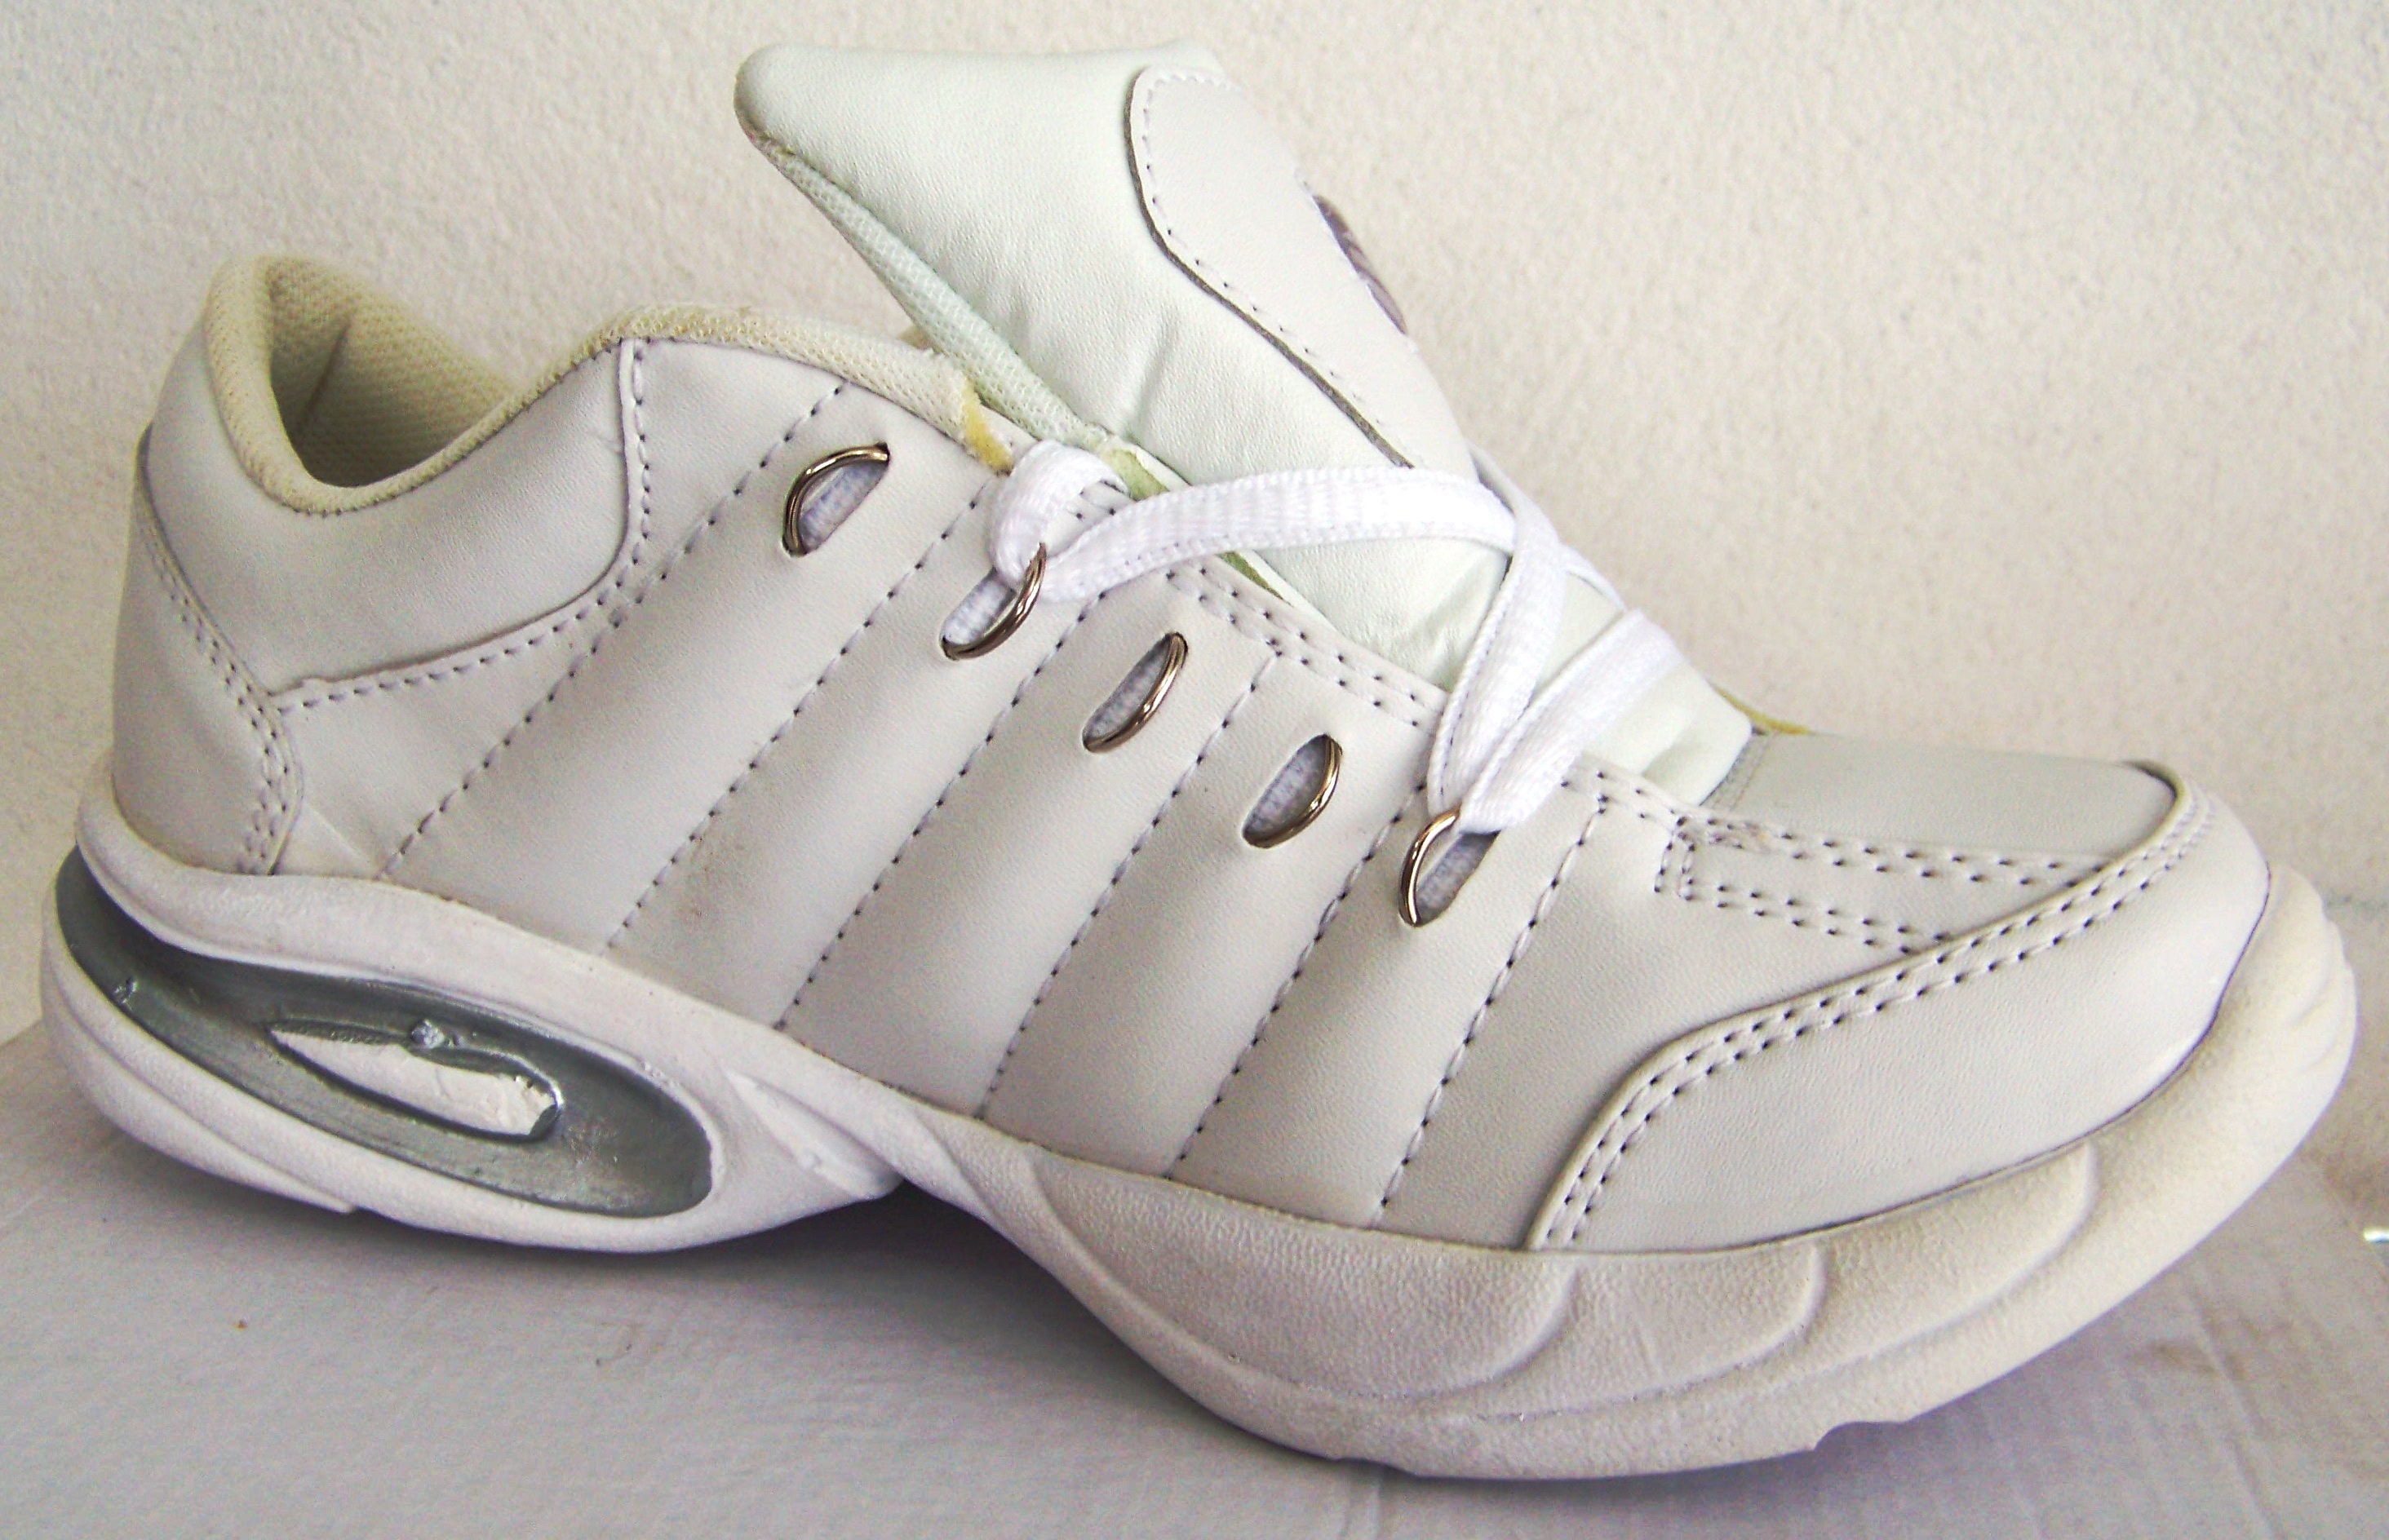 Free photo: Sport shoe - Accessory, Training, Trainers - Free Download ...